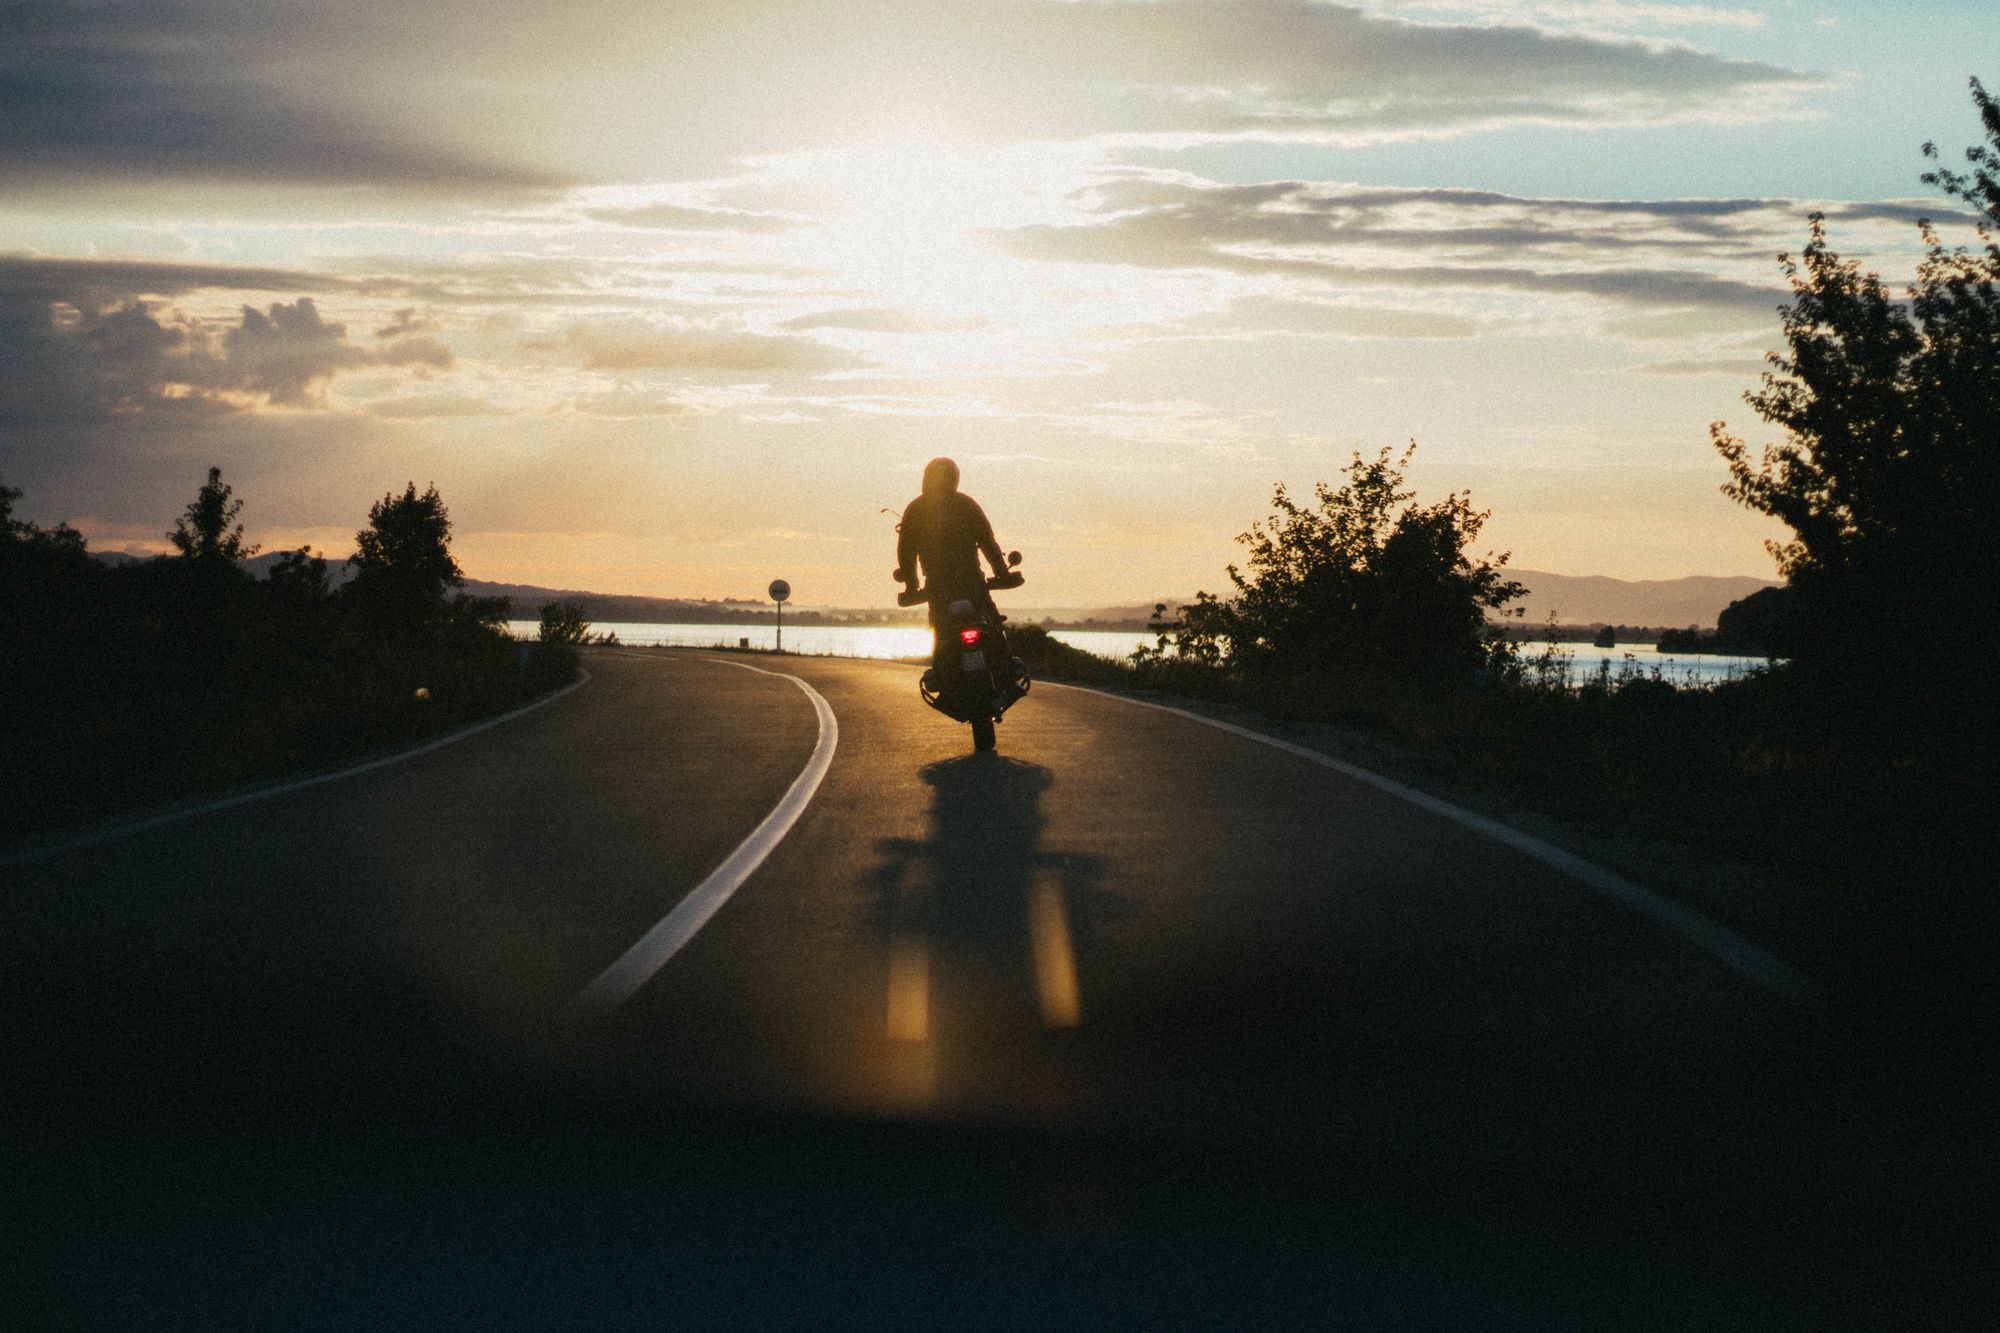 Someone riding a motorcycle at sunset.